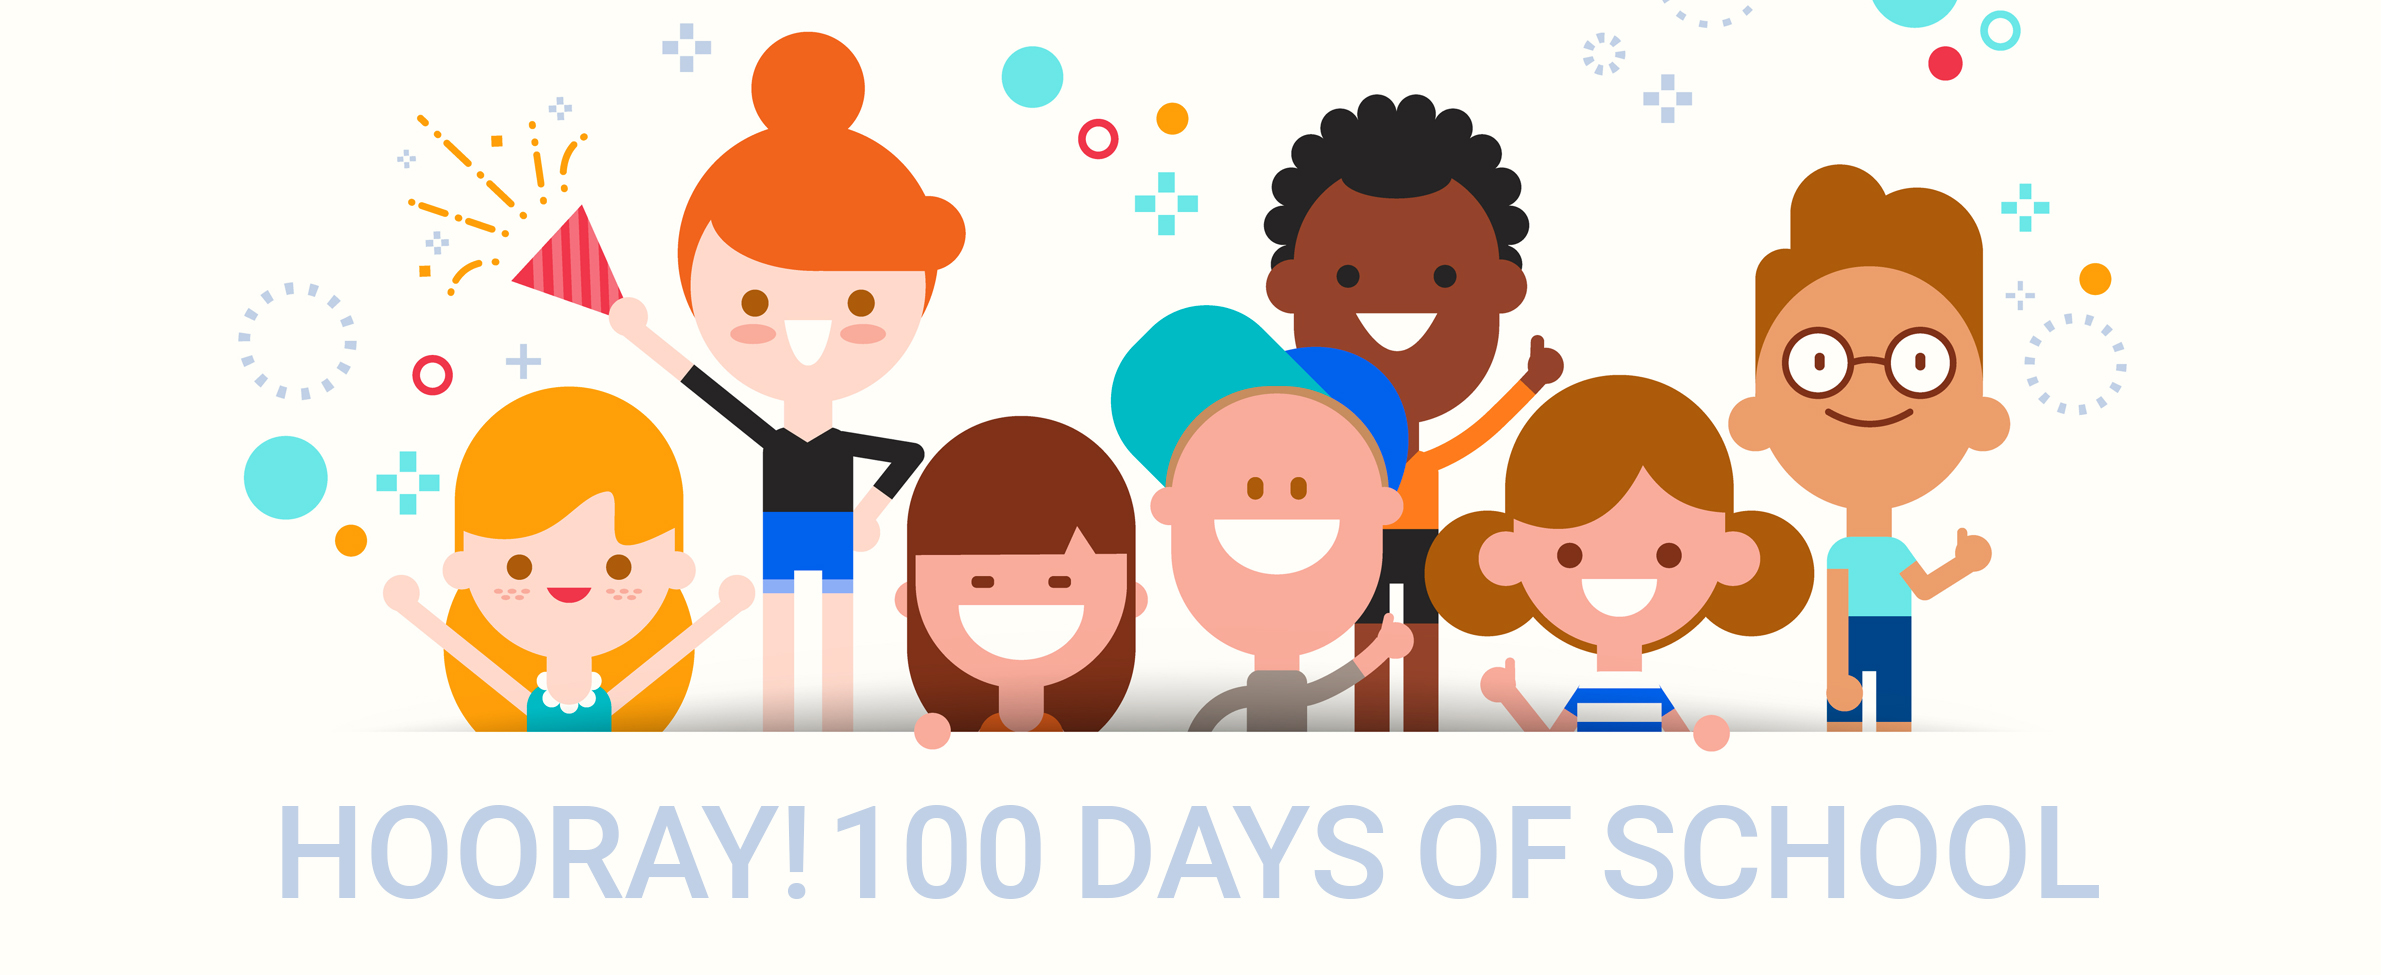 100th-day-of-school